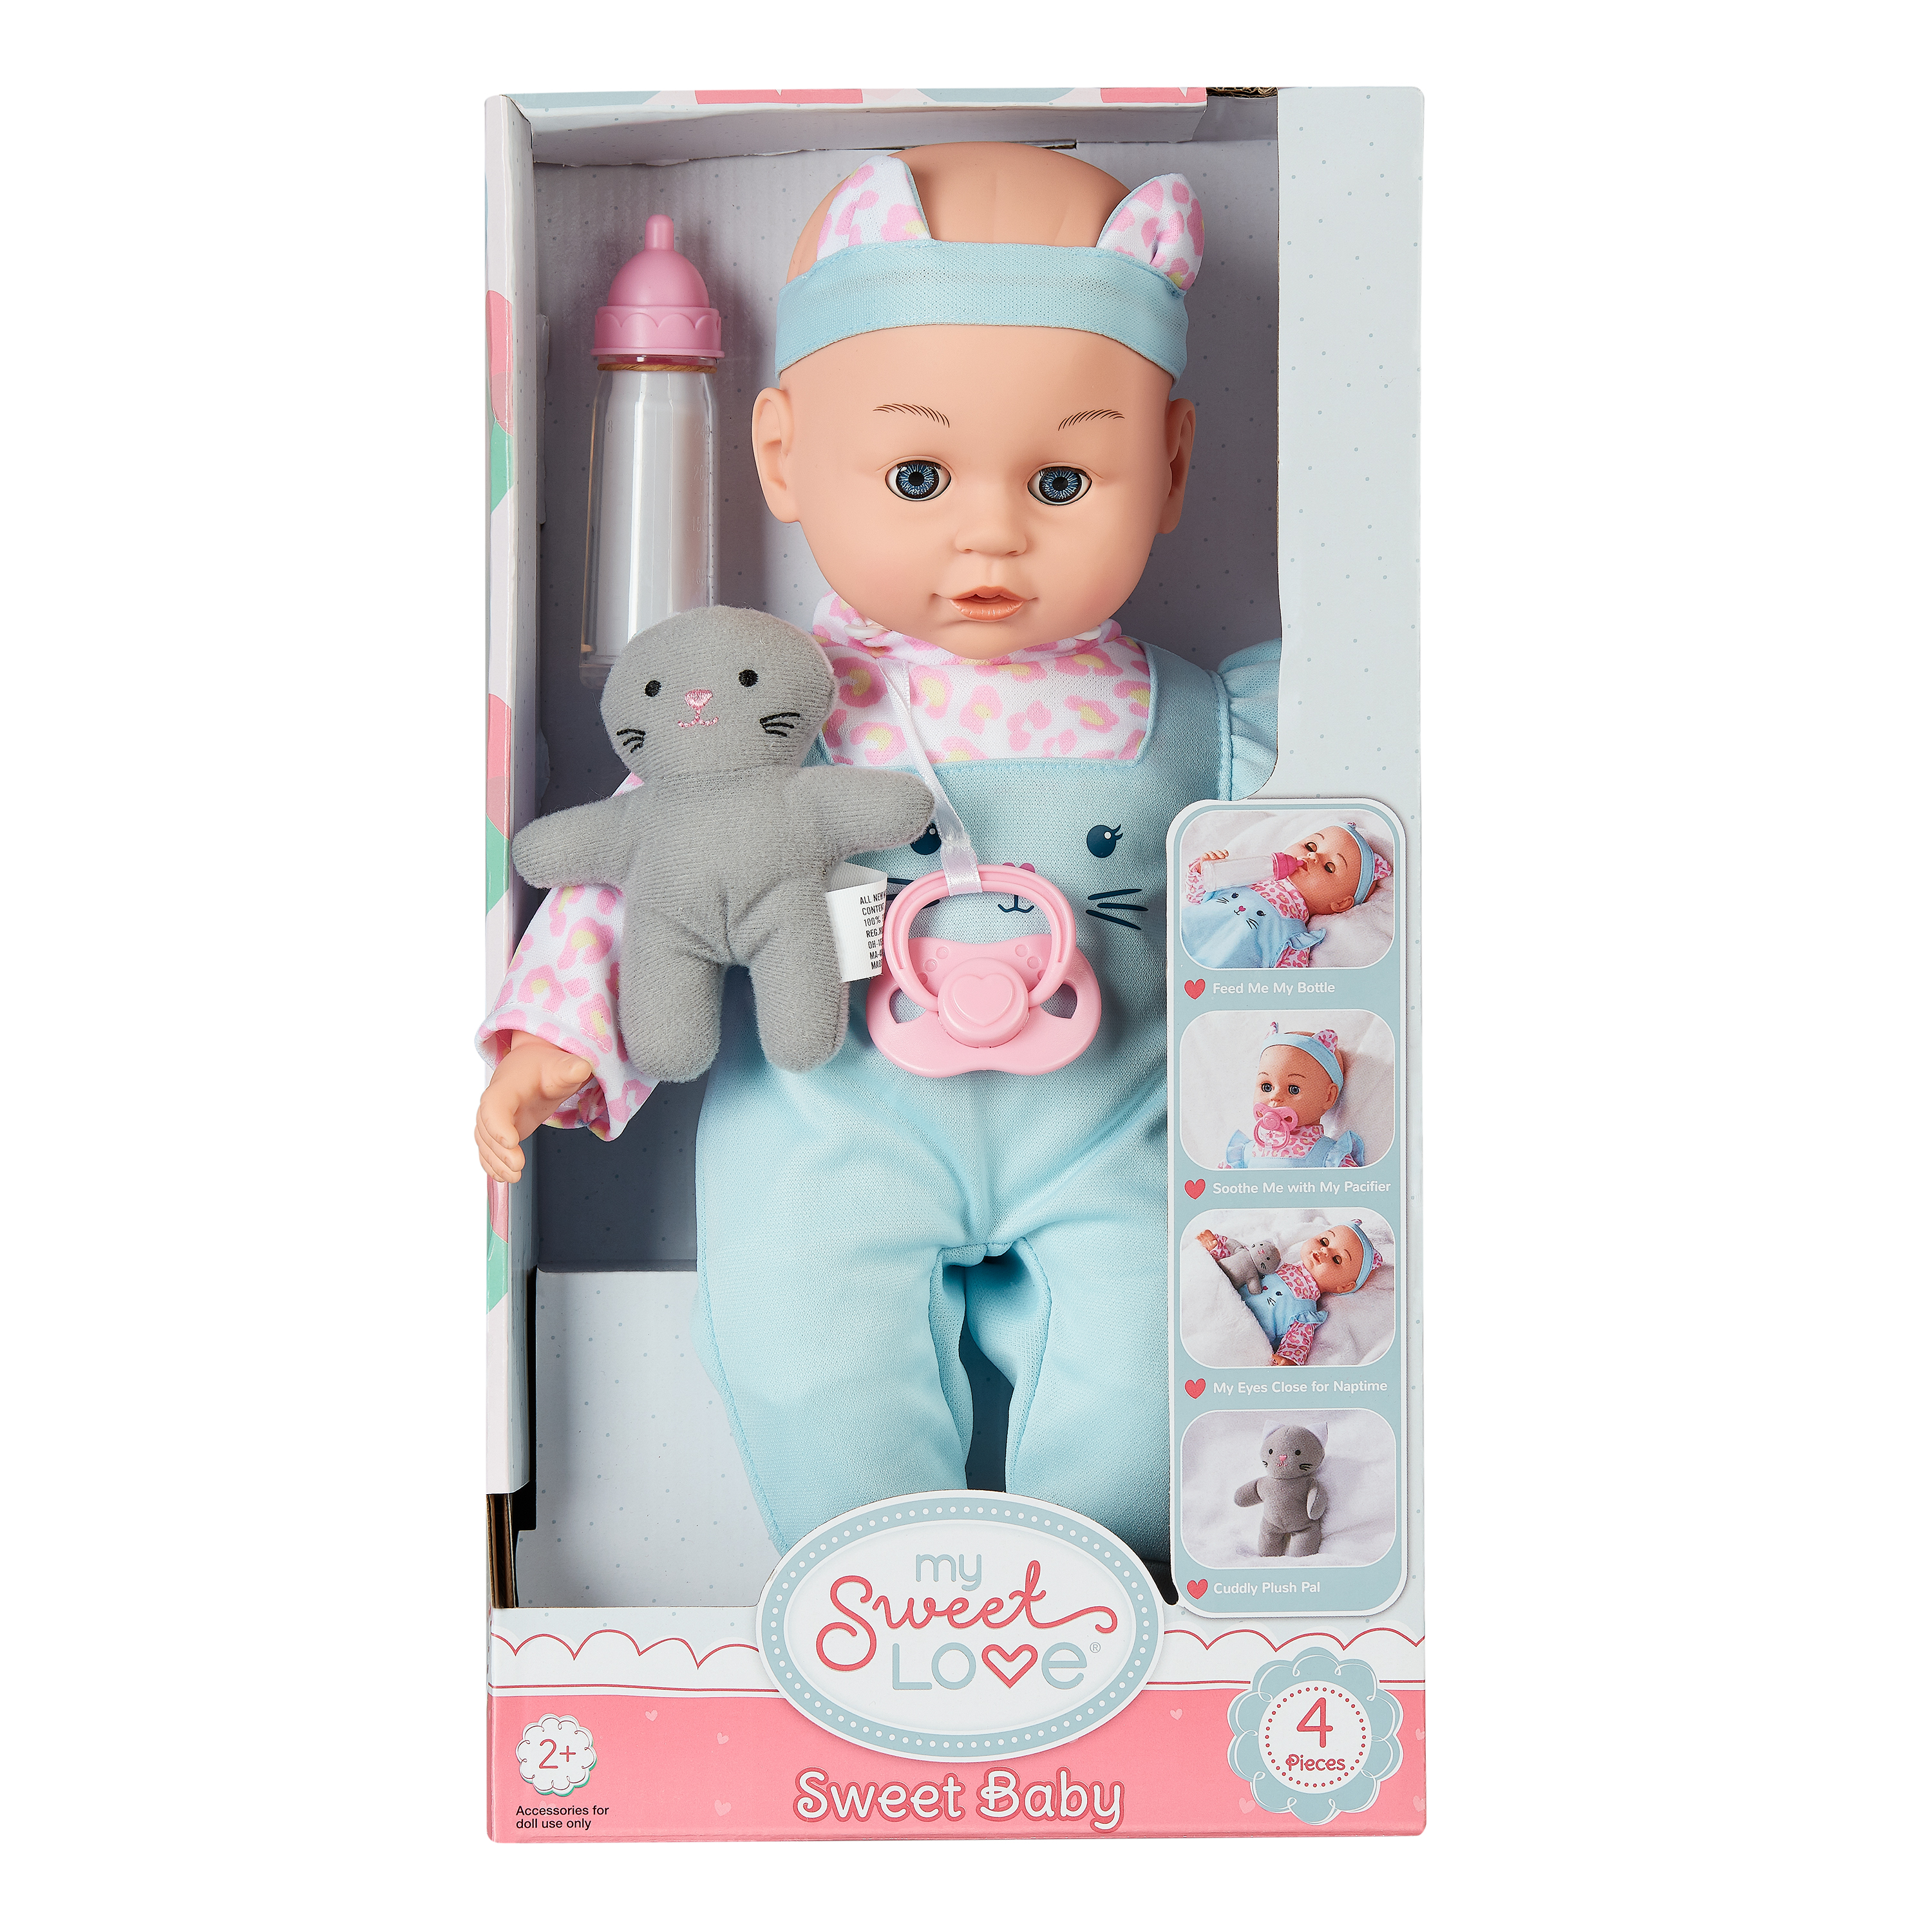 My Sweet Love Sweet Baby Doll Toy Set, 4 Pieces - image 2 of 5